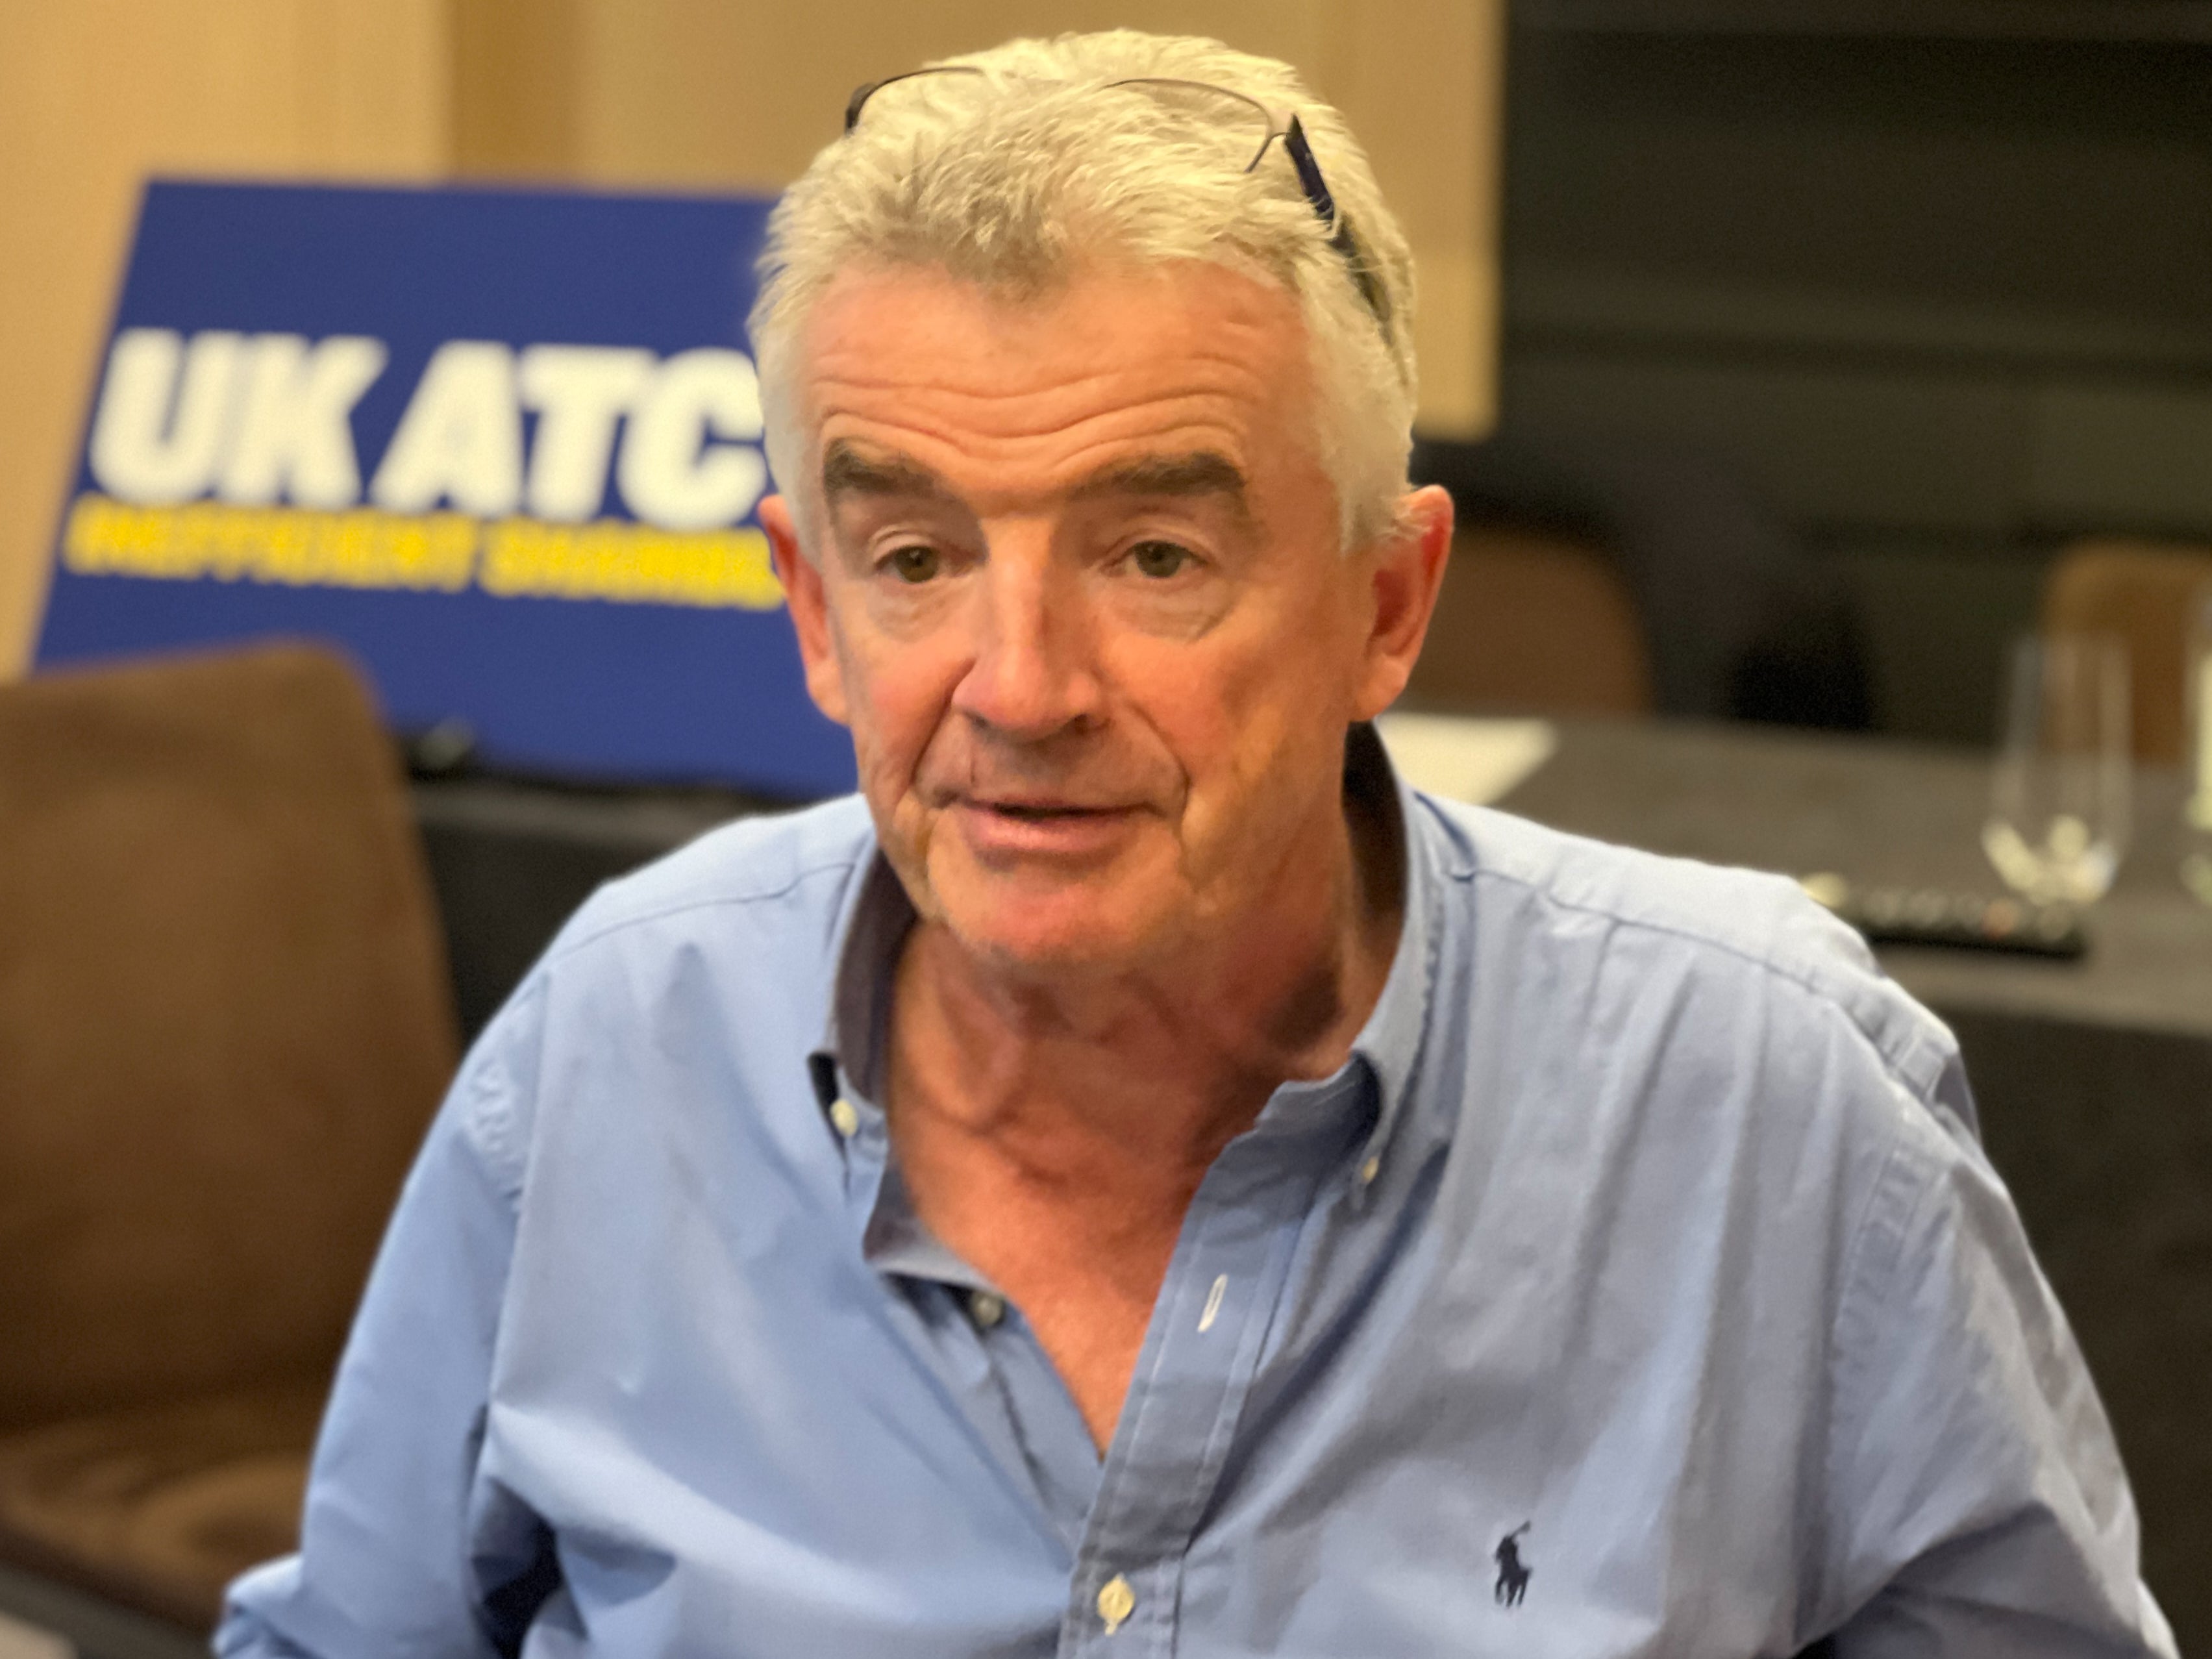 Michael O’Leary, chief executive of Ryanair, at a media event in London on 27 September 2023. The sign behind him reads “UK ATC: Inefficicent shambles”